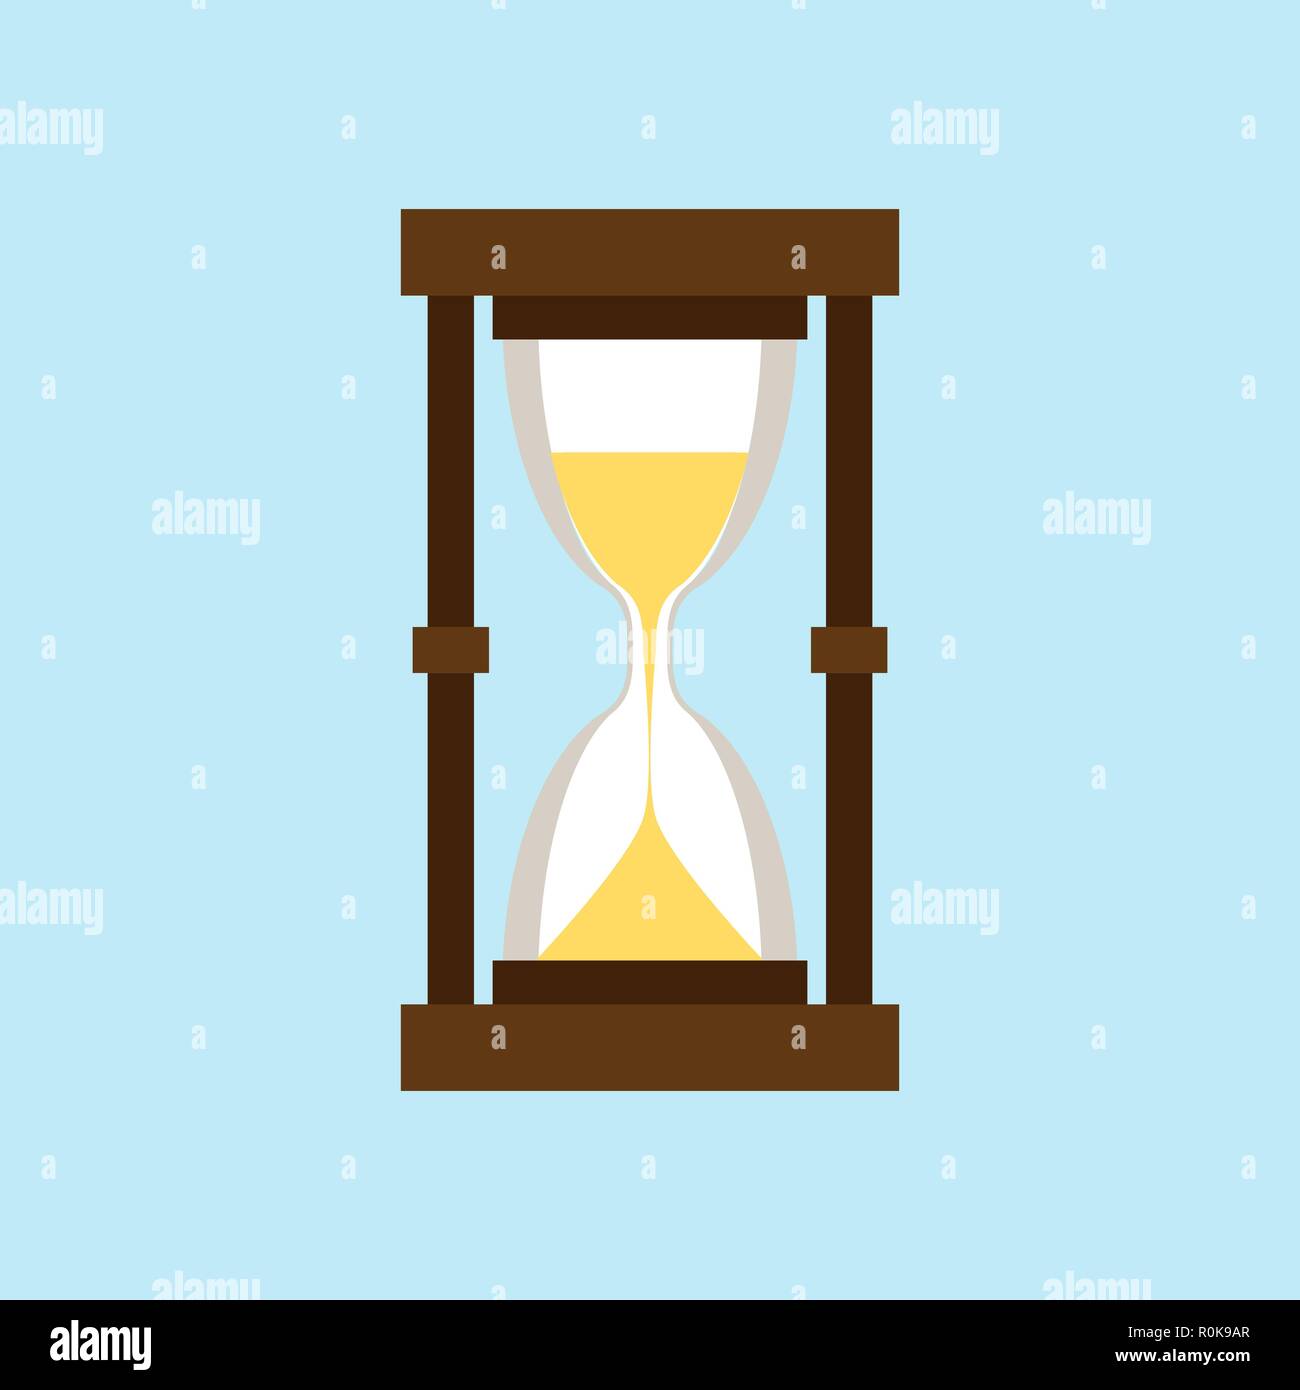 Vector illustration of an hourglass. Sandglass on a light blue background. Modern flat style. Trendy concept for presentations, business, infographic, Stock Vector